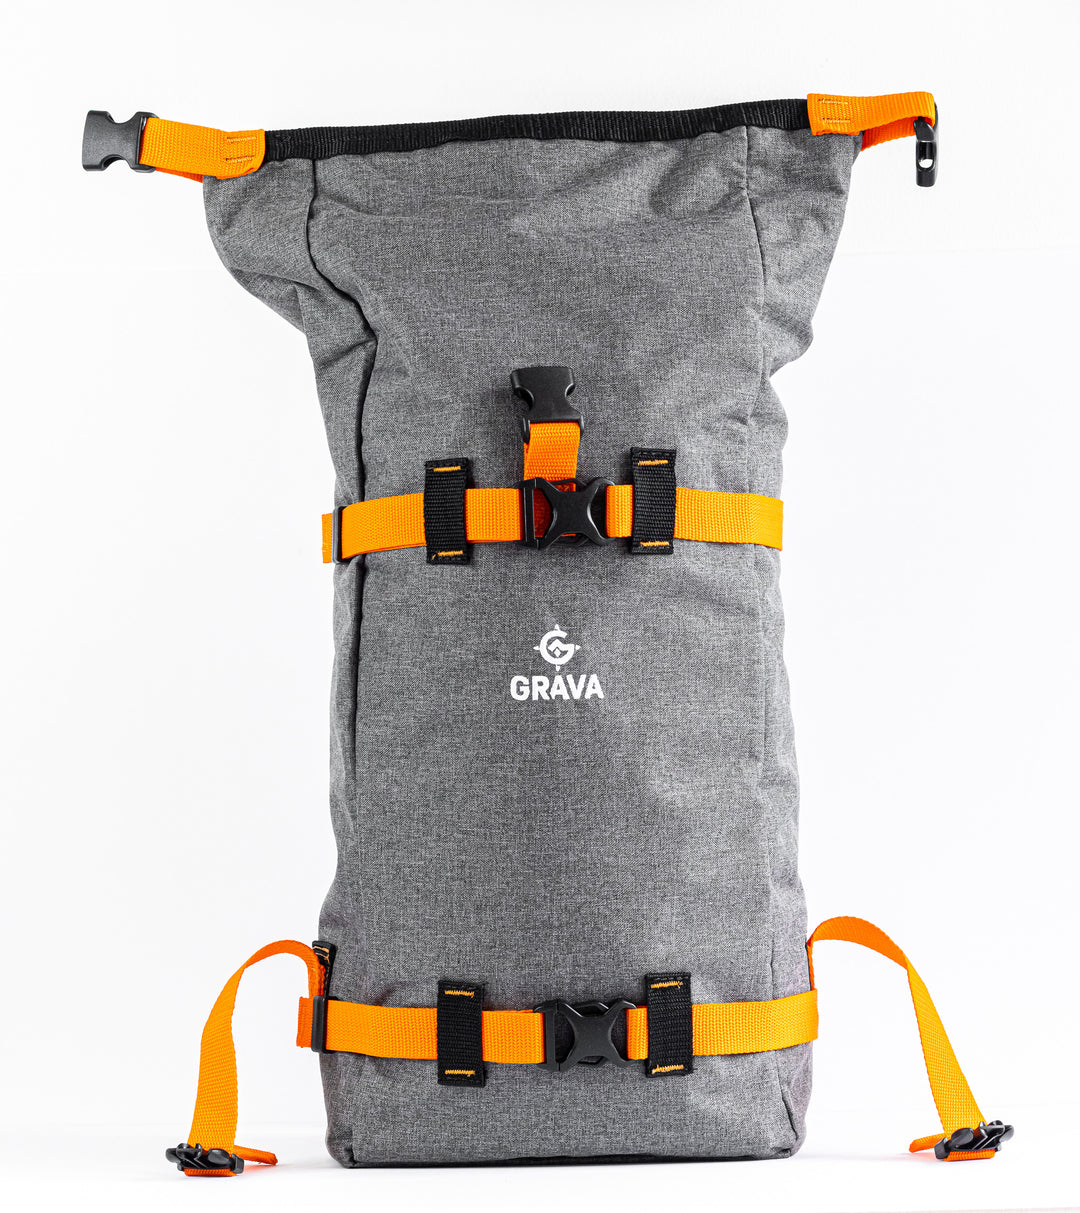 Front view of the Grava adventure backpack again.  For this image the top is displayed not rolled over.  We see an ample amount of material for the roll top, the stitching at the top of the roll top bag and the location of the top buckles. 